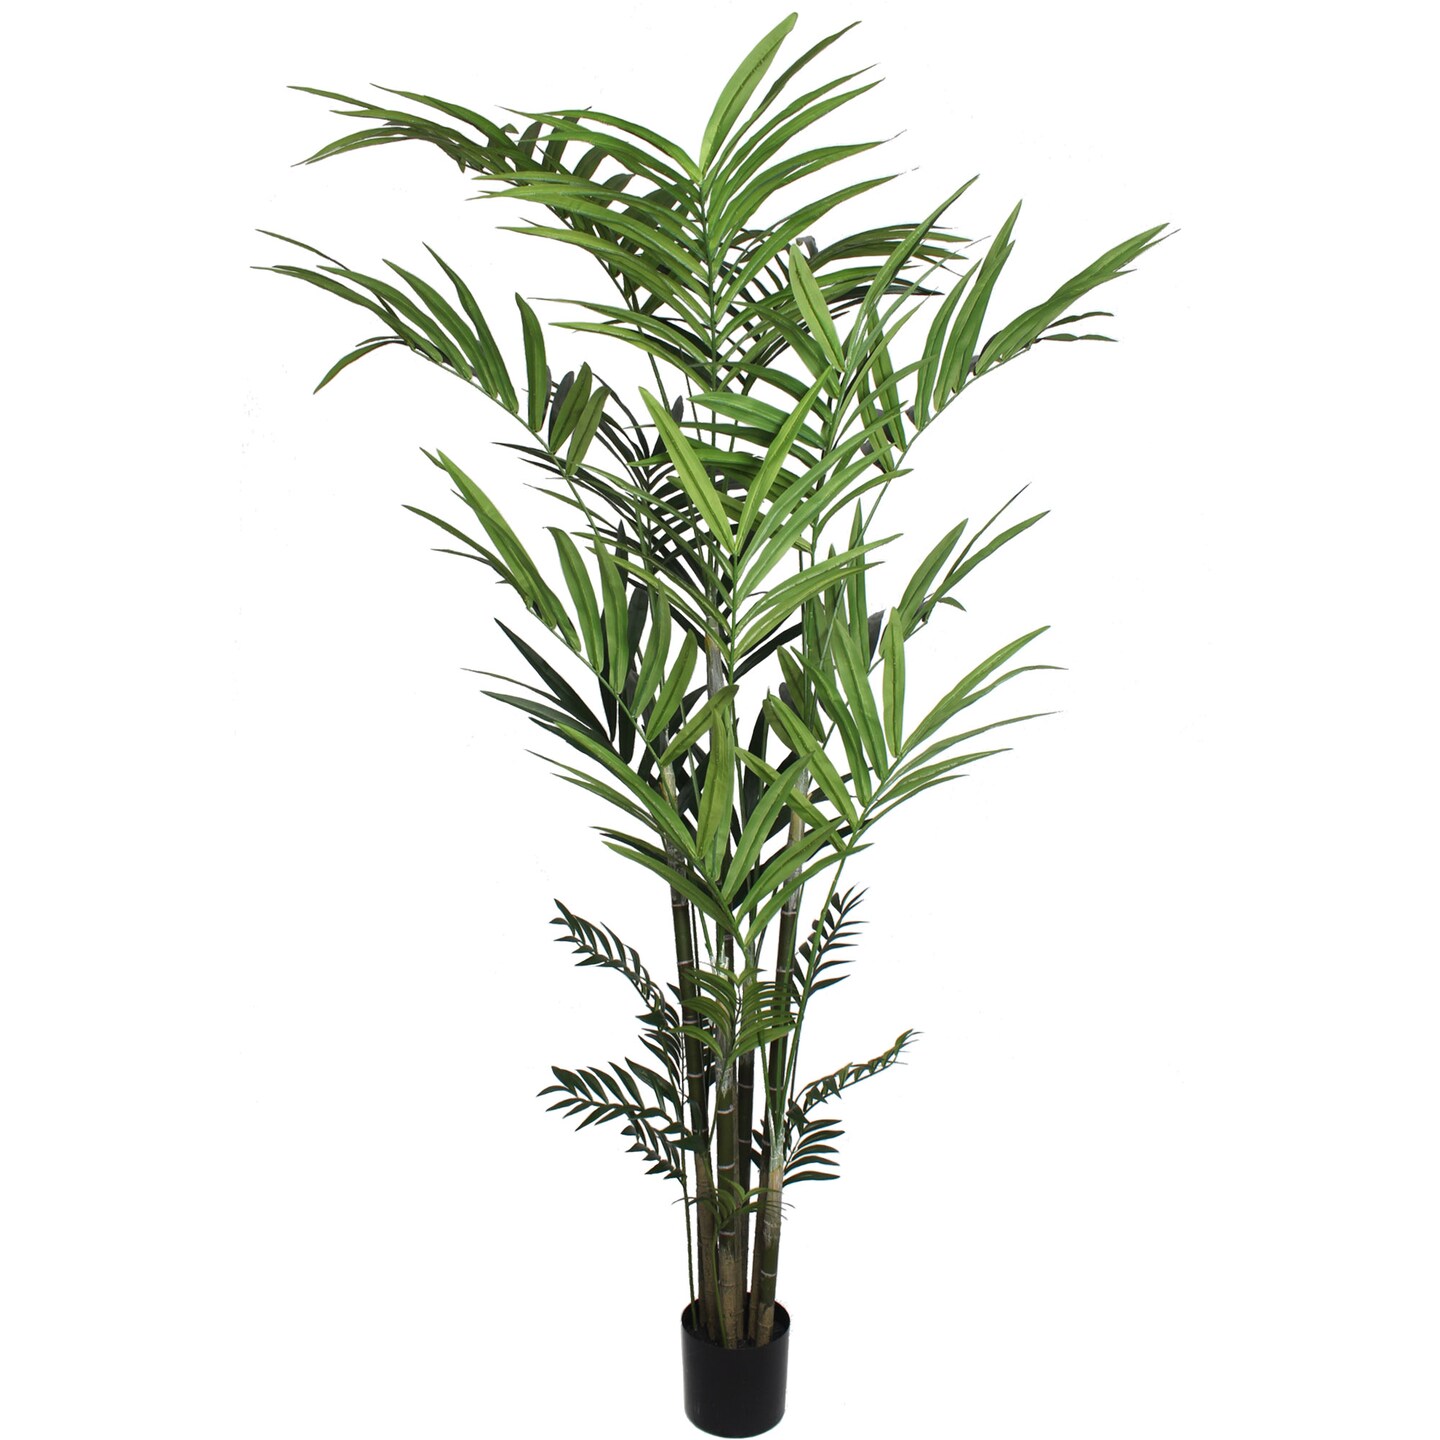 8ft Kentia Palm Tree in Black Pot with 399 Realistic Silk Leaves